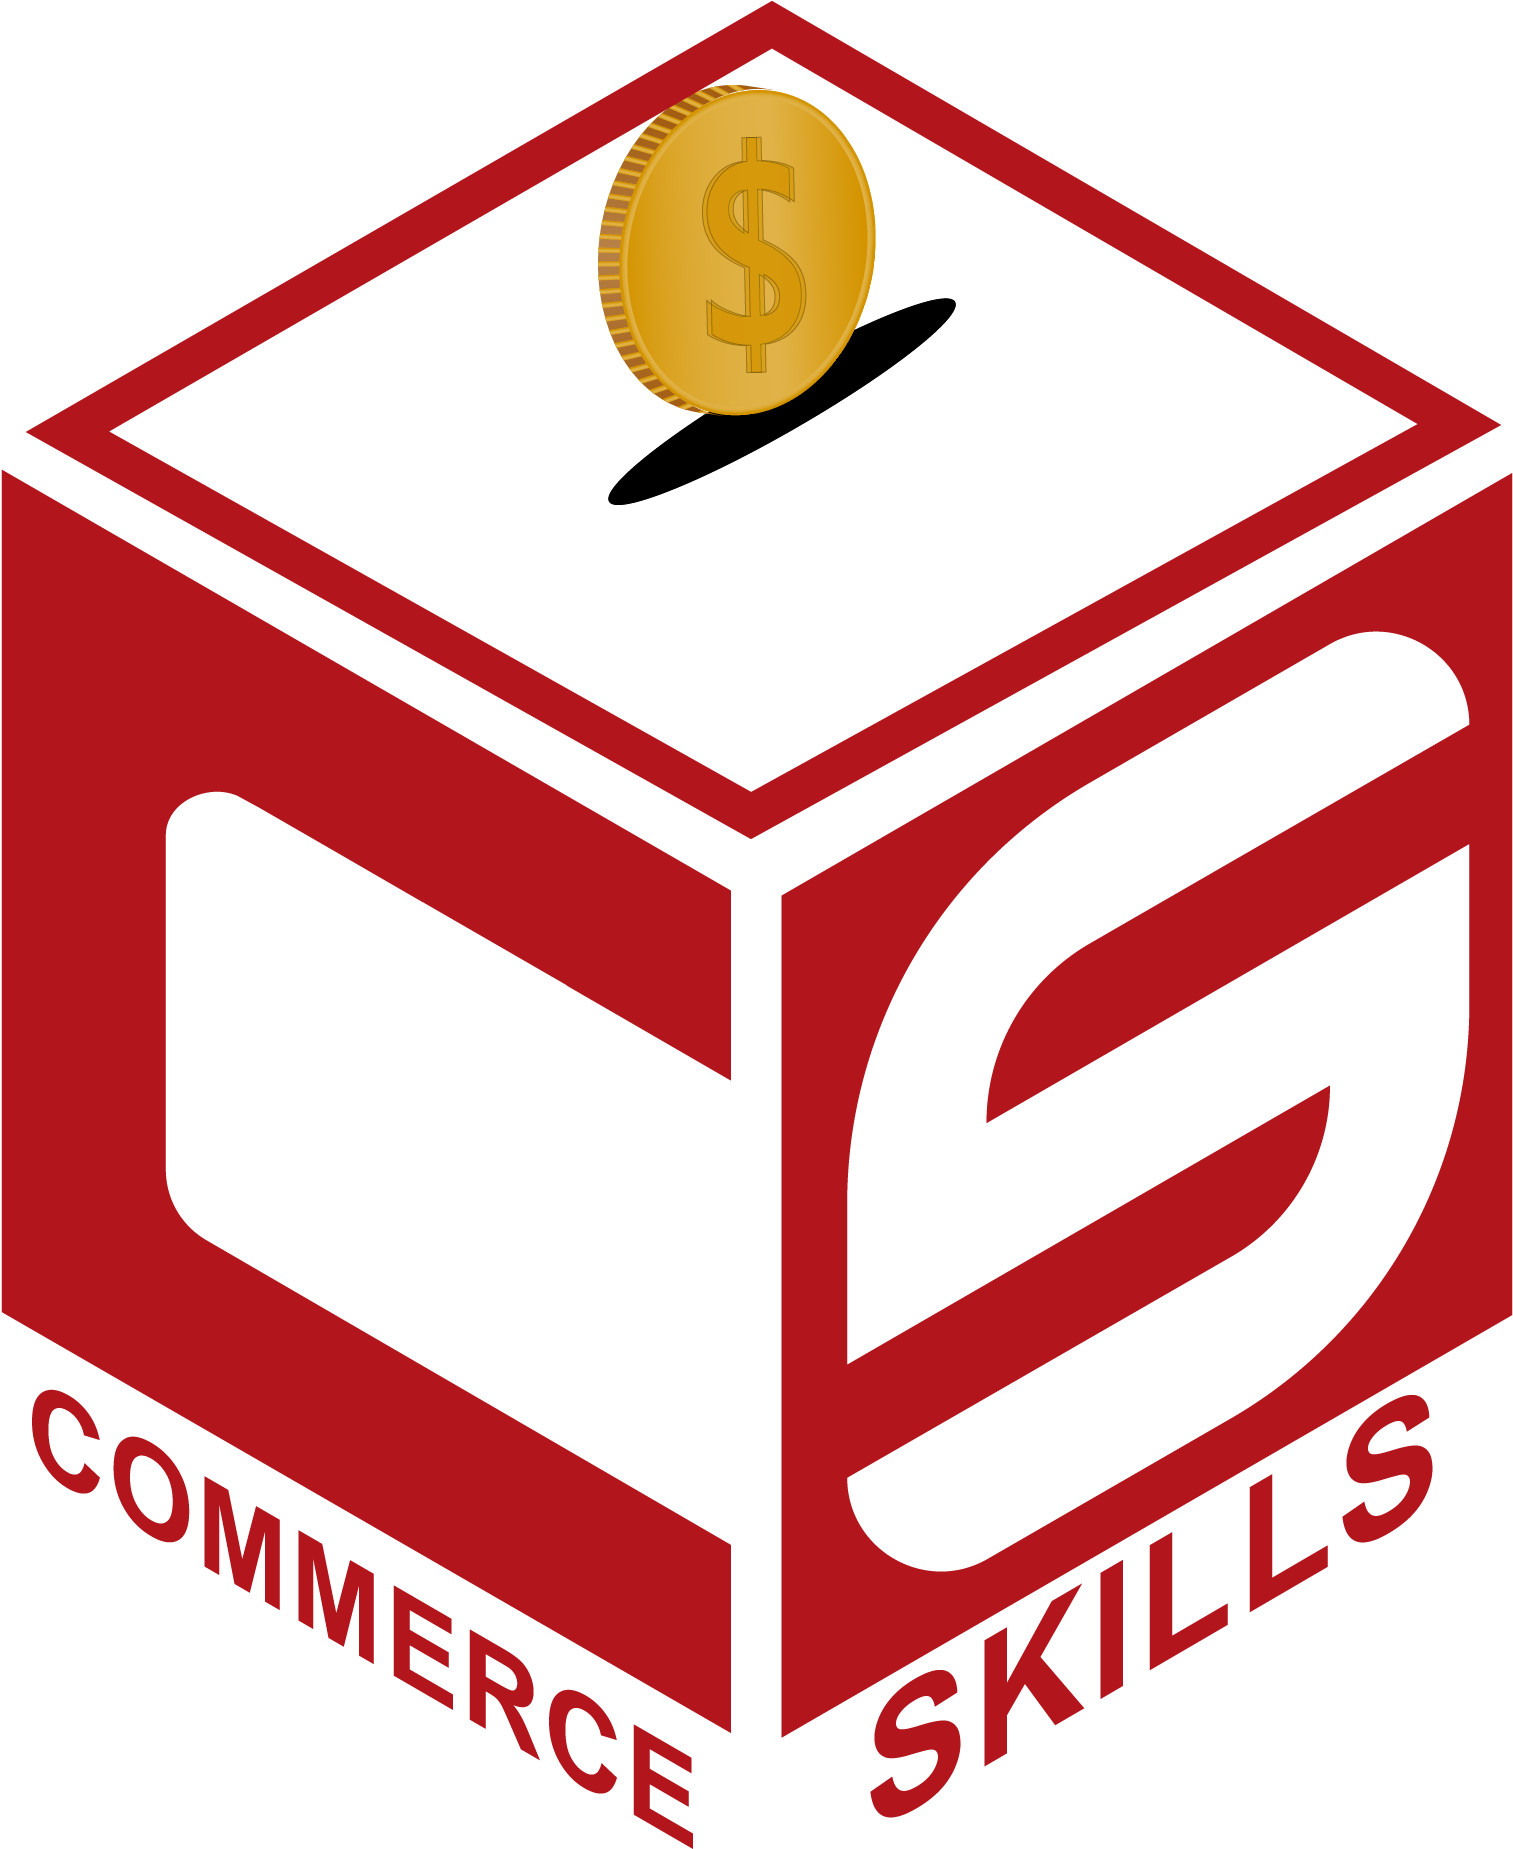 Here You Can Get Complete Skills Of Commerce Education - Commerce Skills (2000x2000)